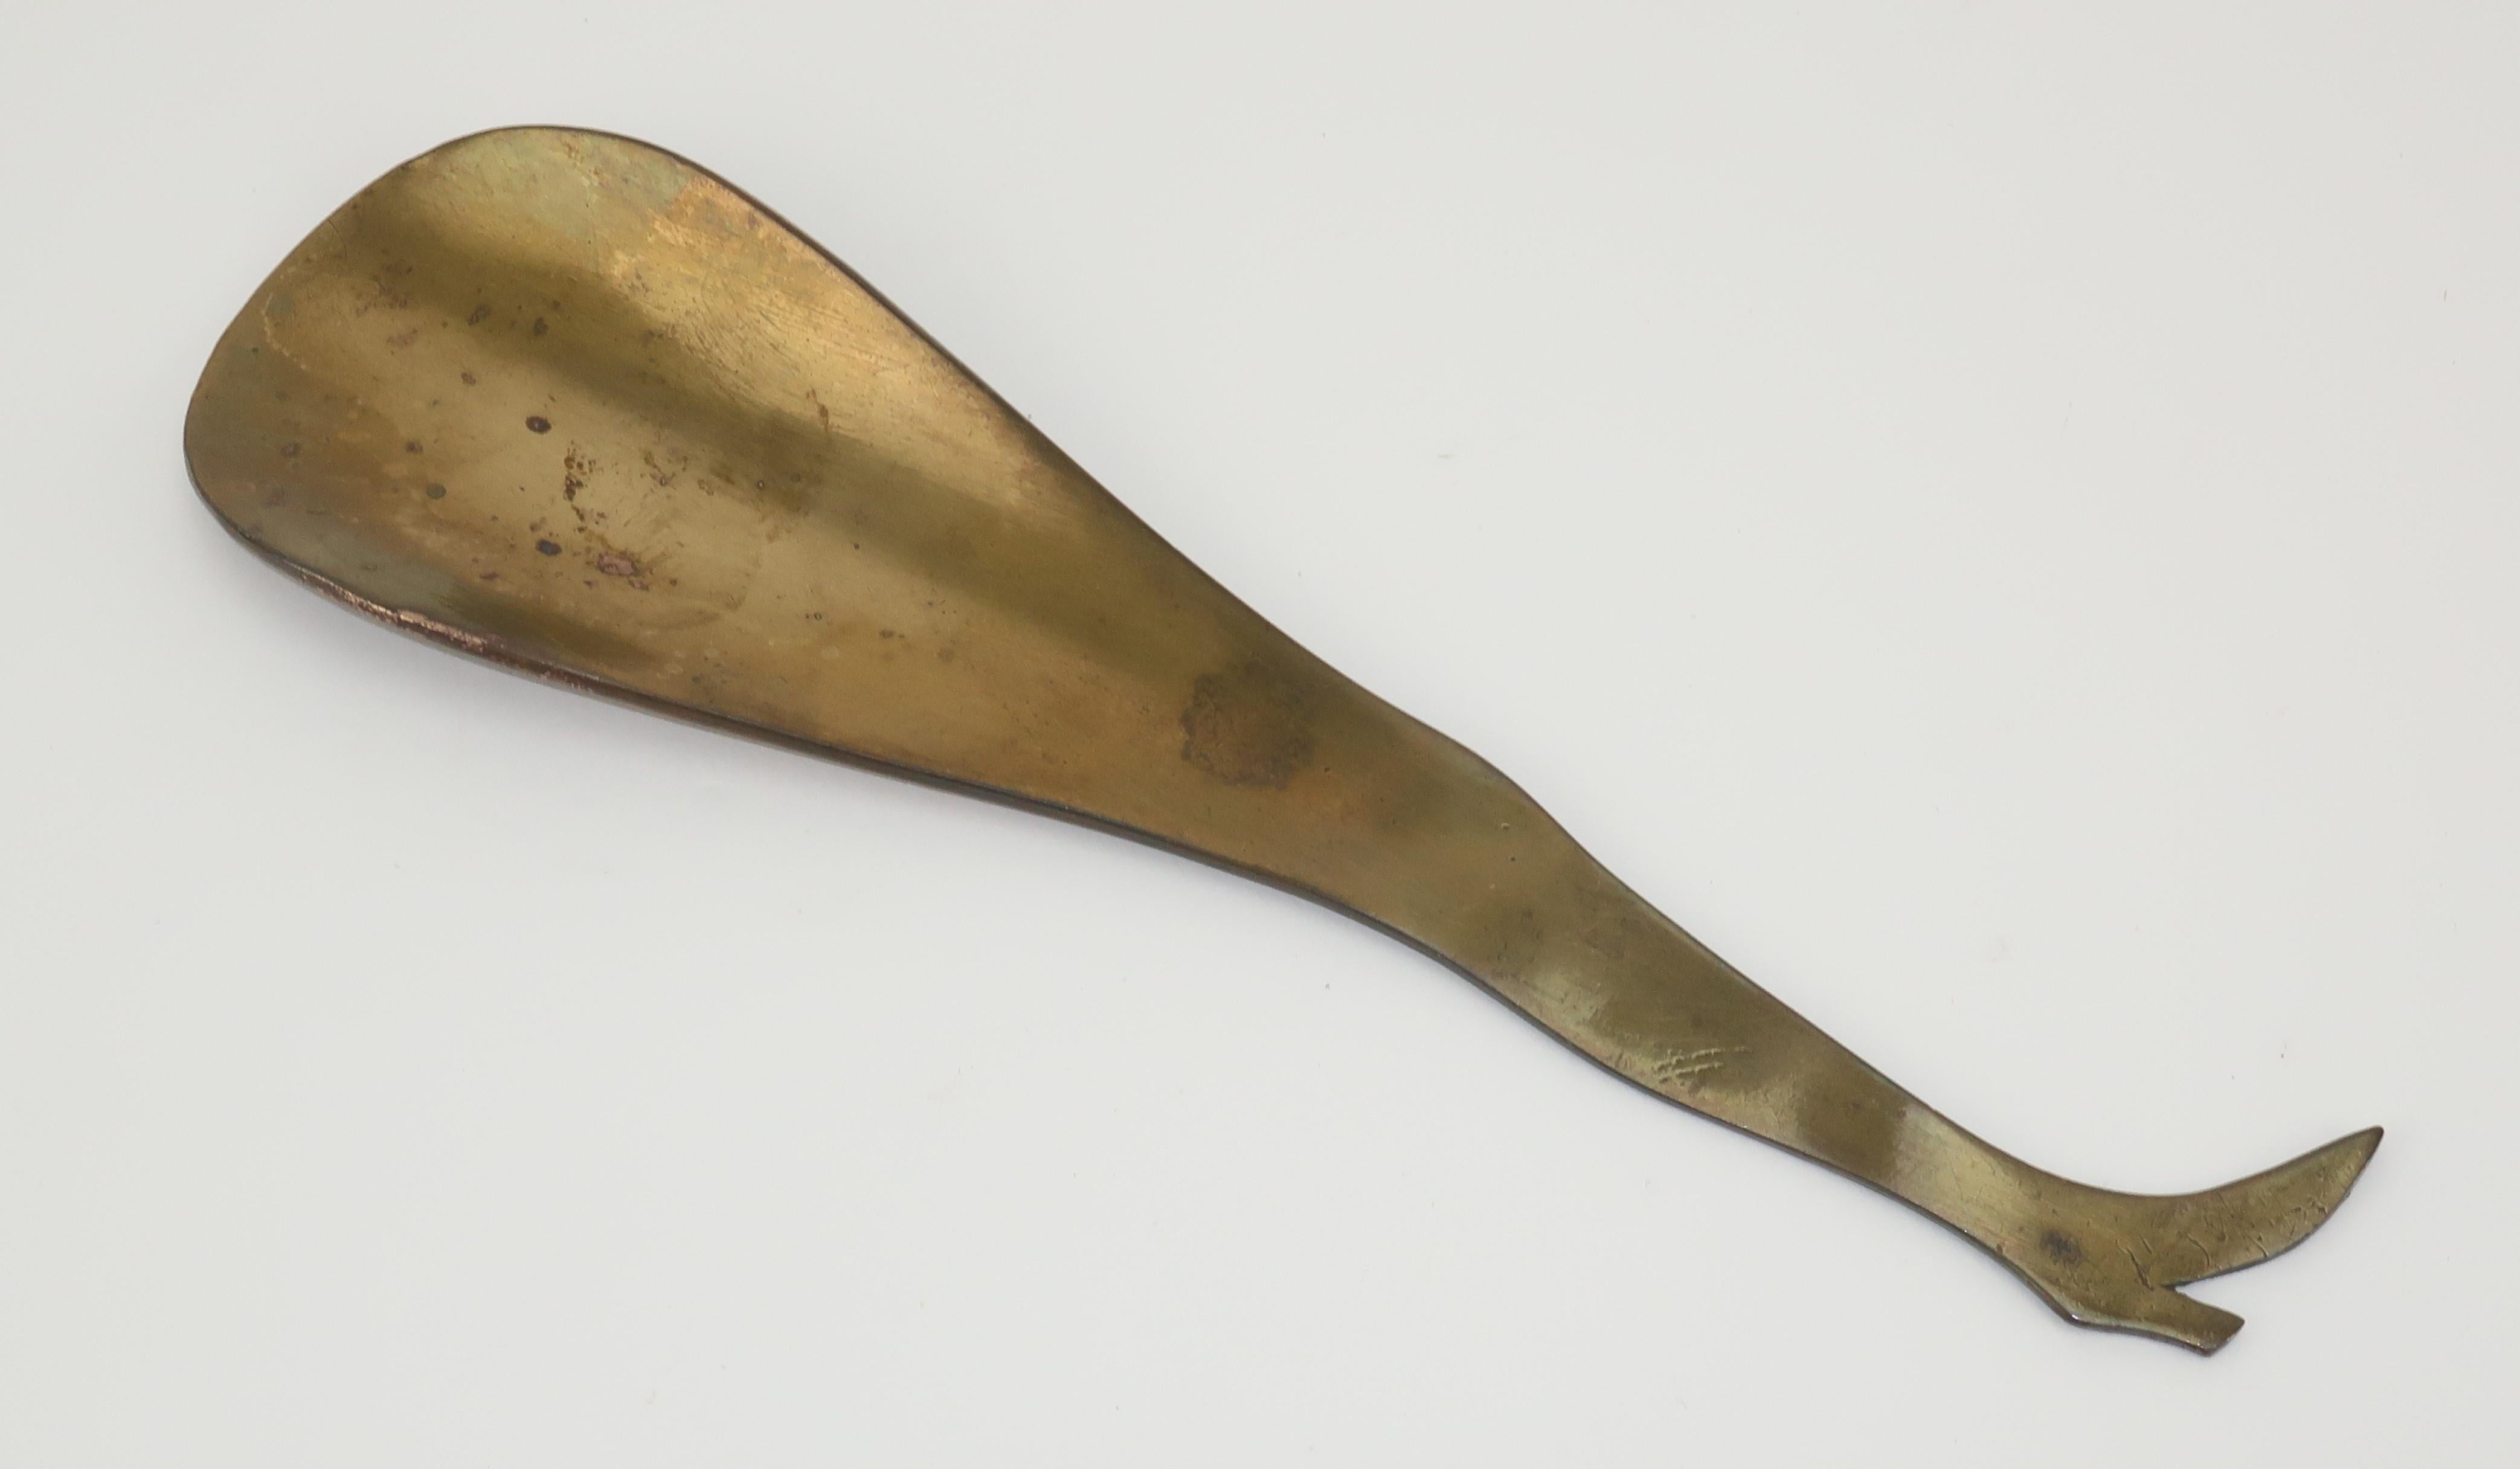 Get a leg up and put your best foot forward with a 1950's era brass shoe horn cleverly shaped like a ladies' leg. Metal shoe horns are the best and this one is adorable to boot ... no pun intended. No maker's mark.
CONDITION
Good vintage condition